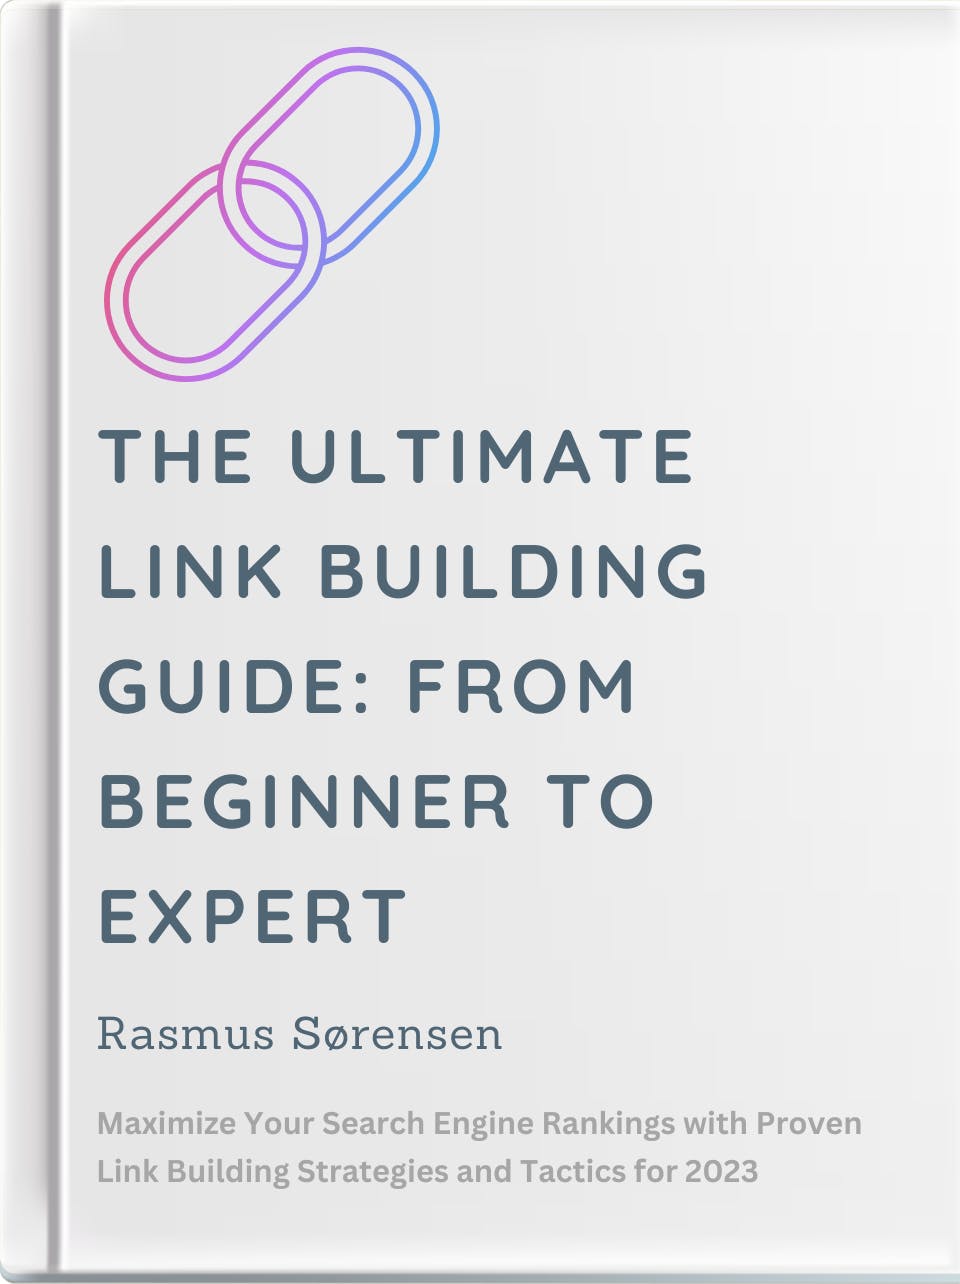 The Ultimate Link Building Guide media 1